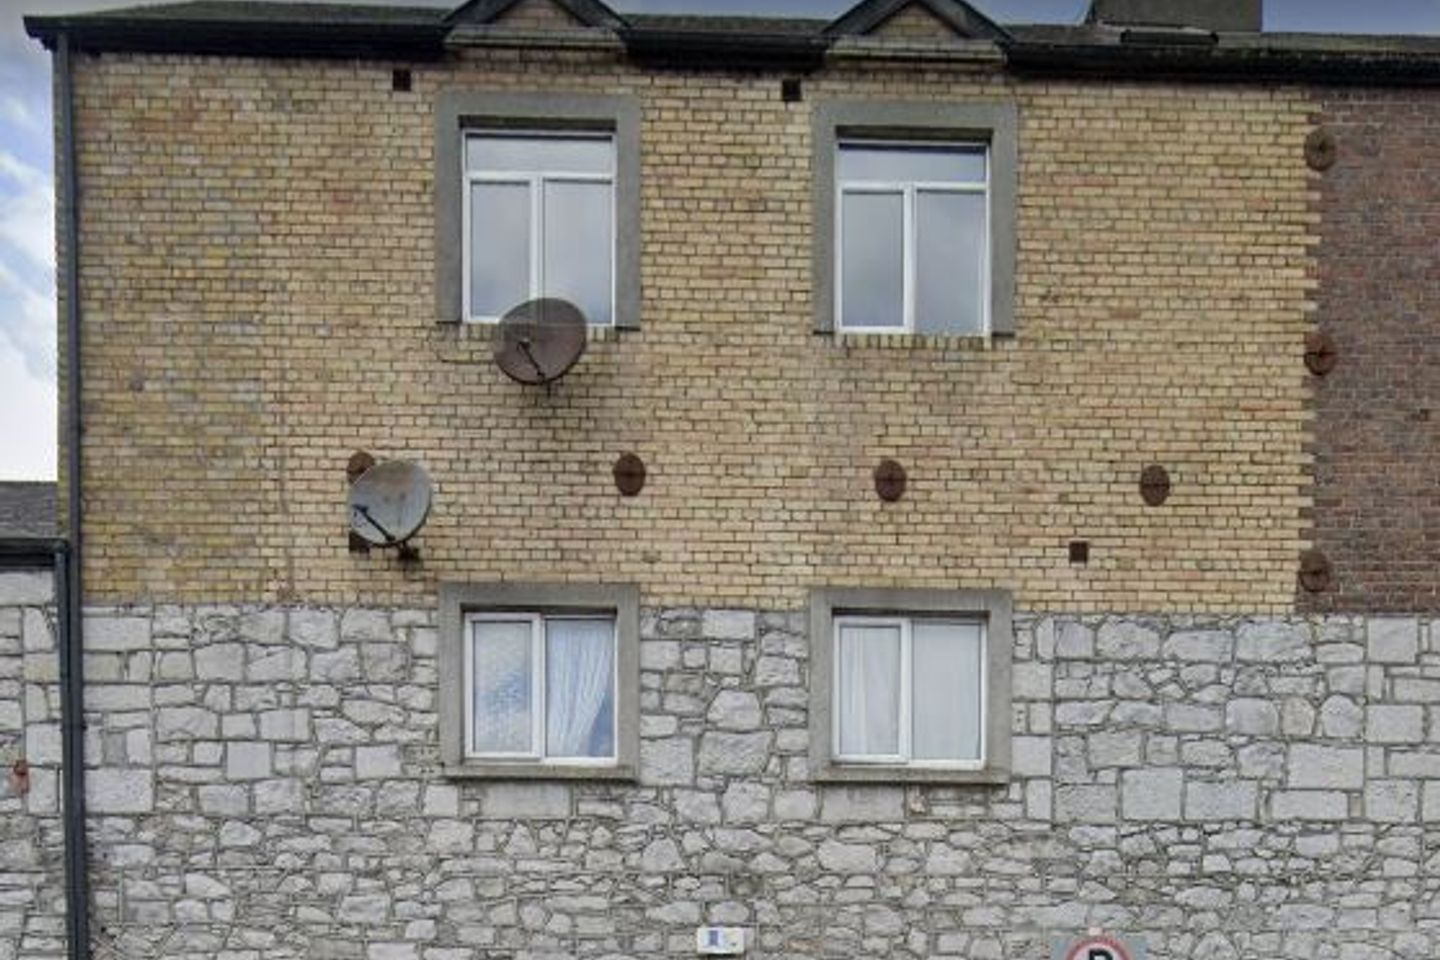 Apartment 35, The Granary, Tullamore, Co. Offaly